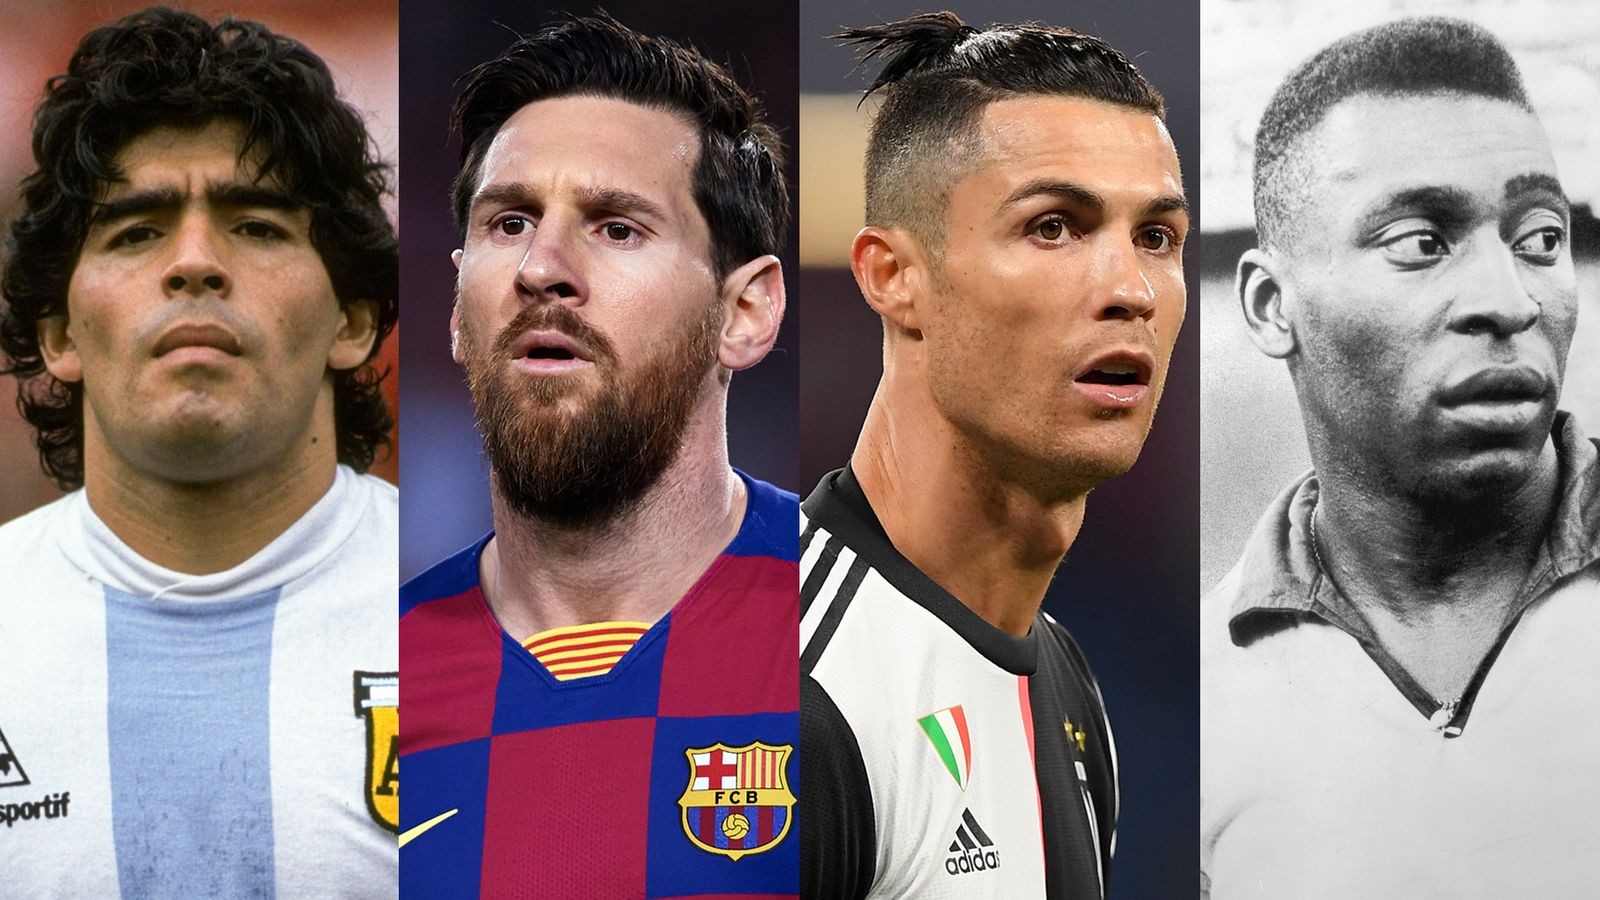 World's number 1 football player - Know who is the best footballer